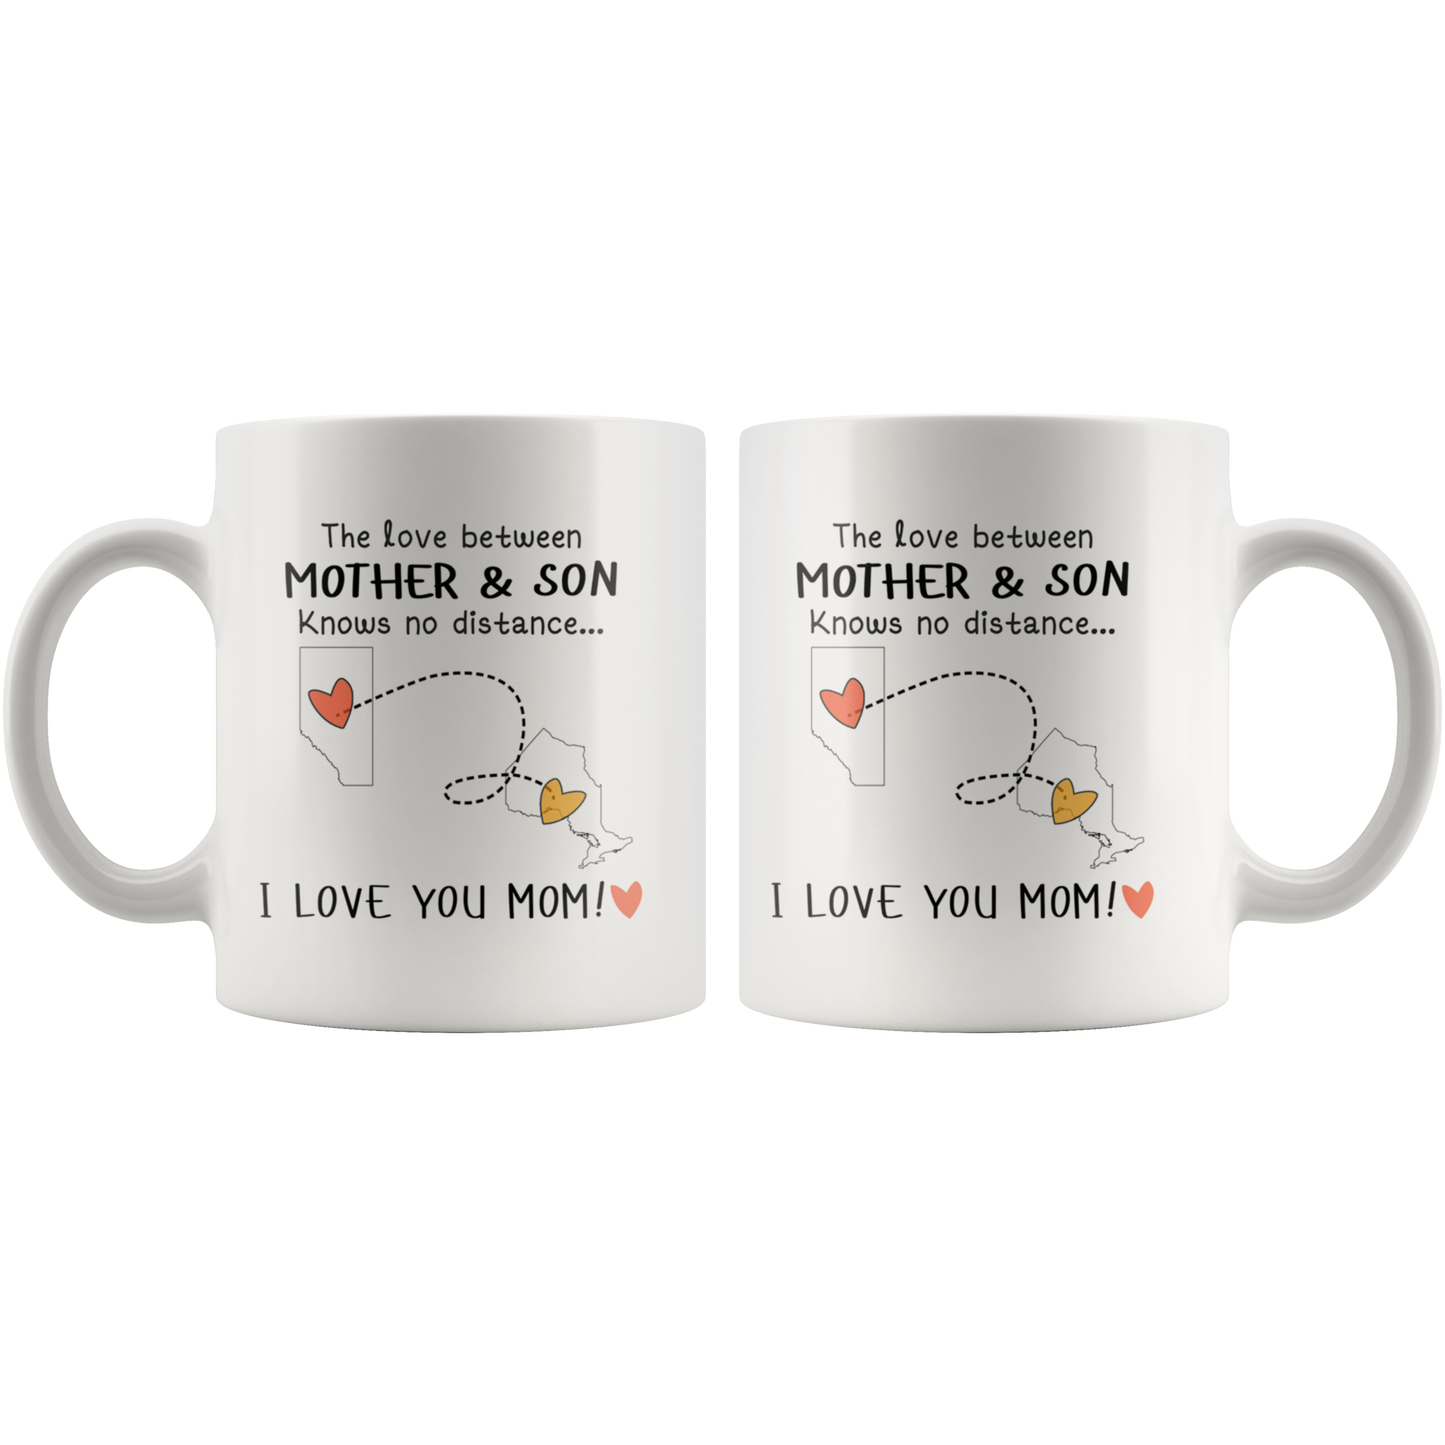 MUG0120547161-sp-24218 - [ Alberta | Ontario ]Mothers Day Gifts from Son - The Love Between Mother and So